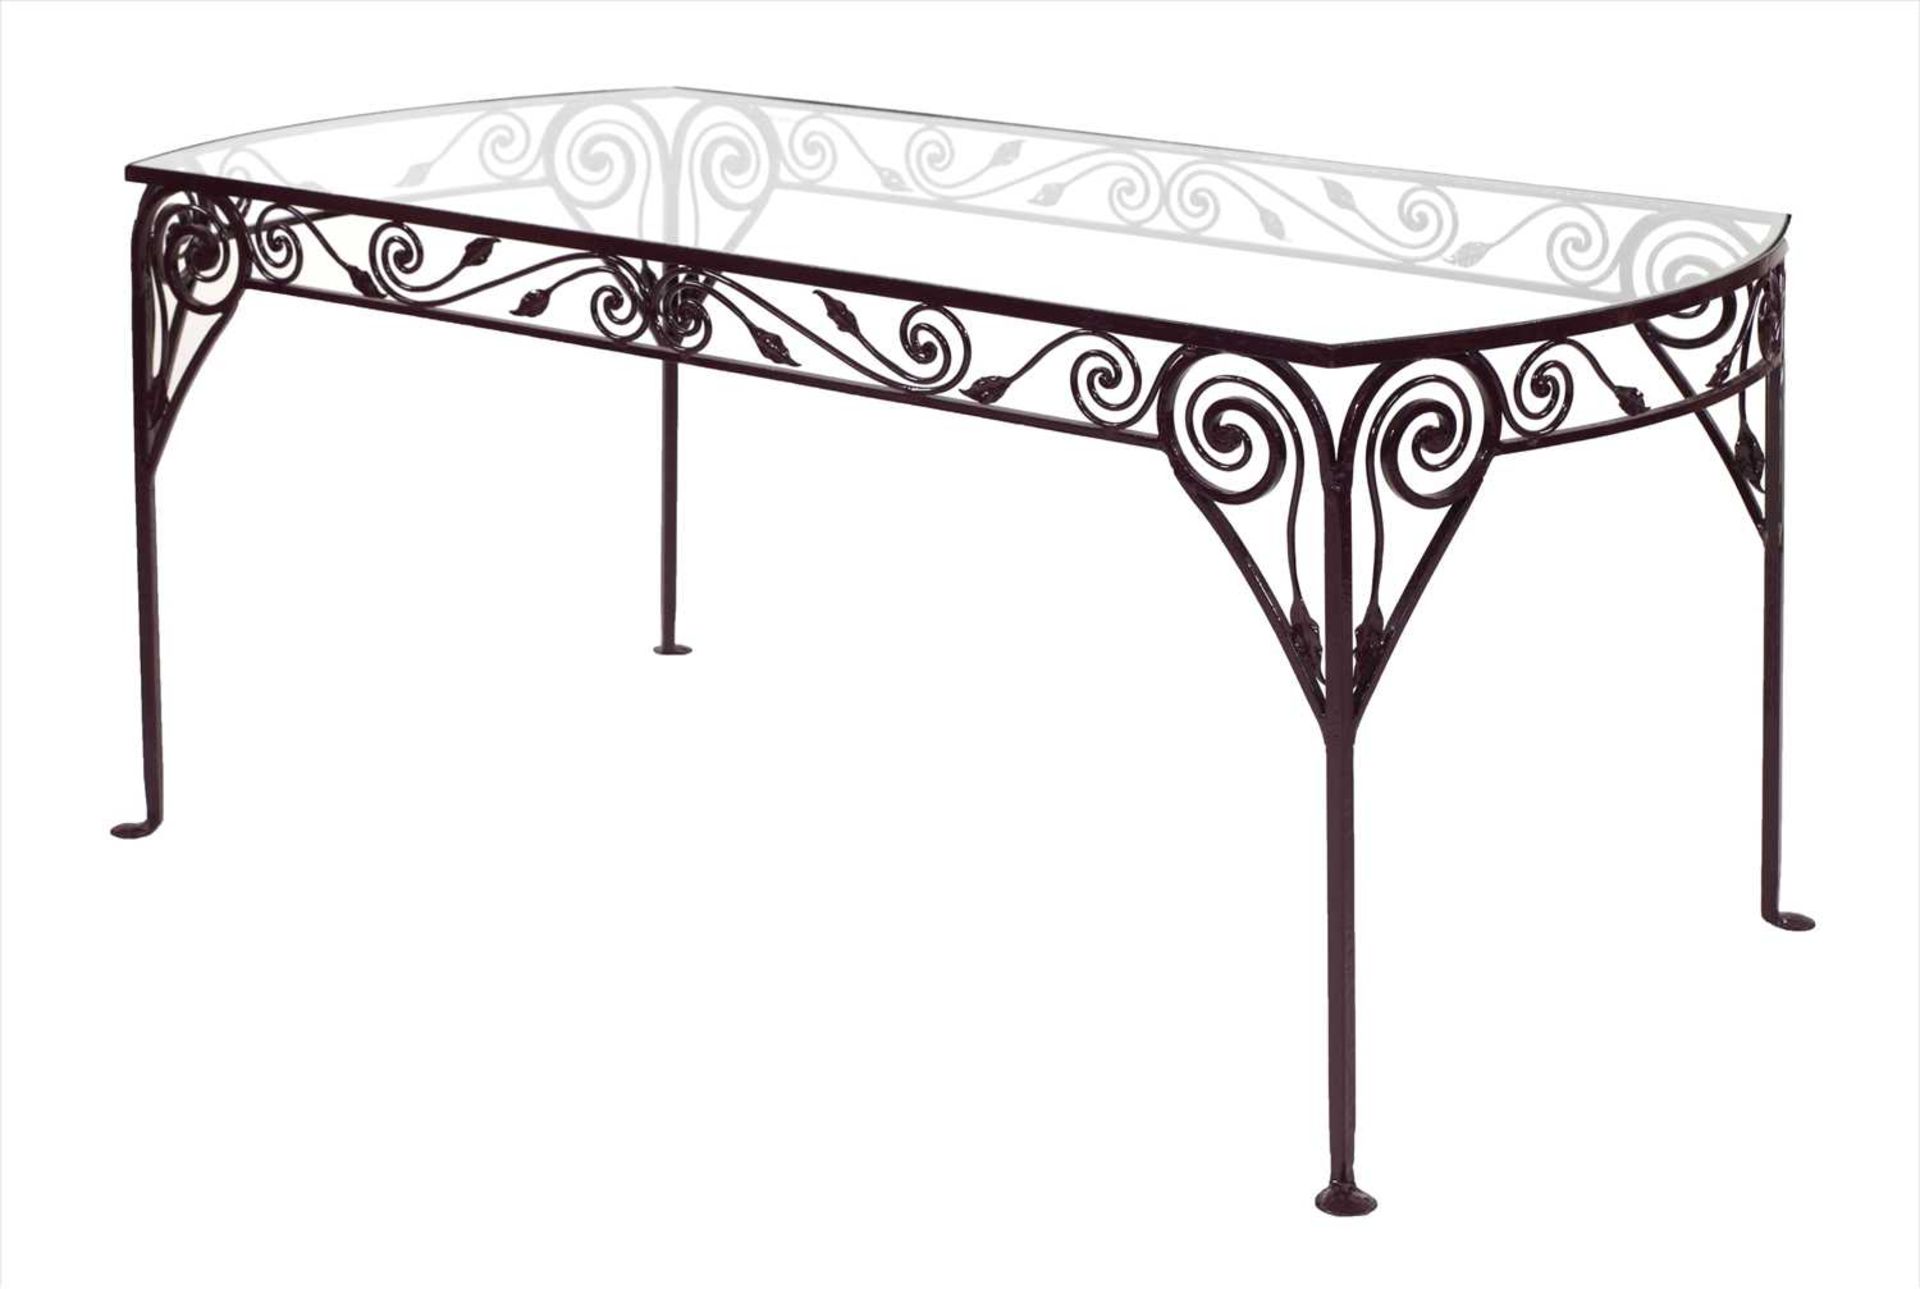 A contemporary wrought iron dining table,